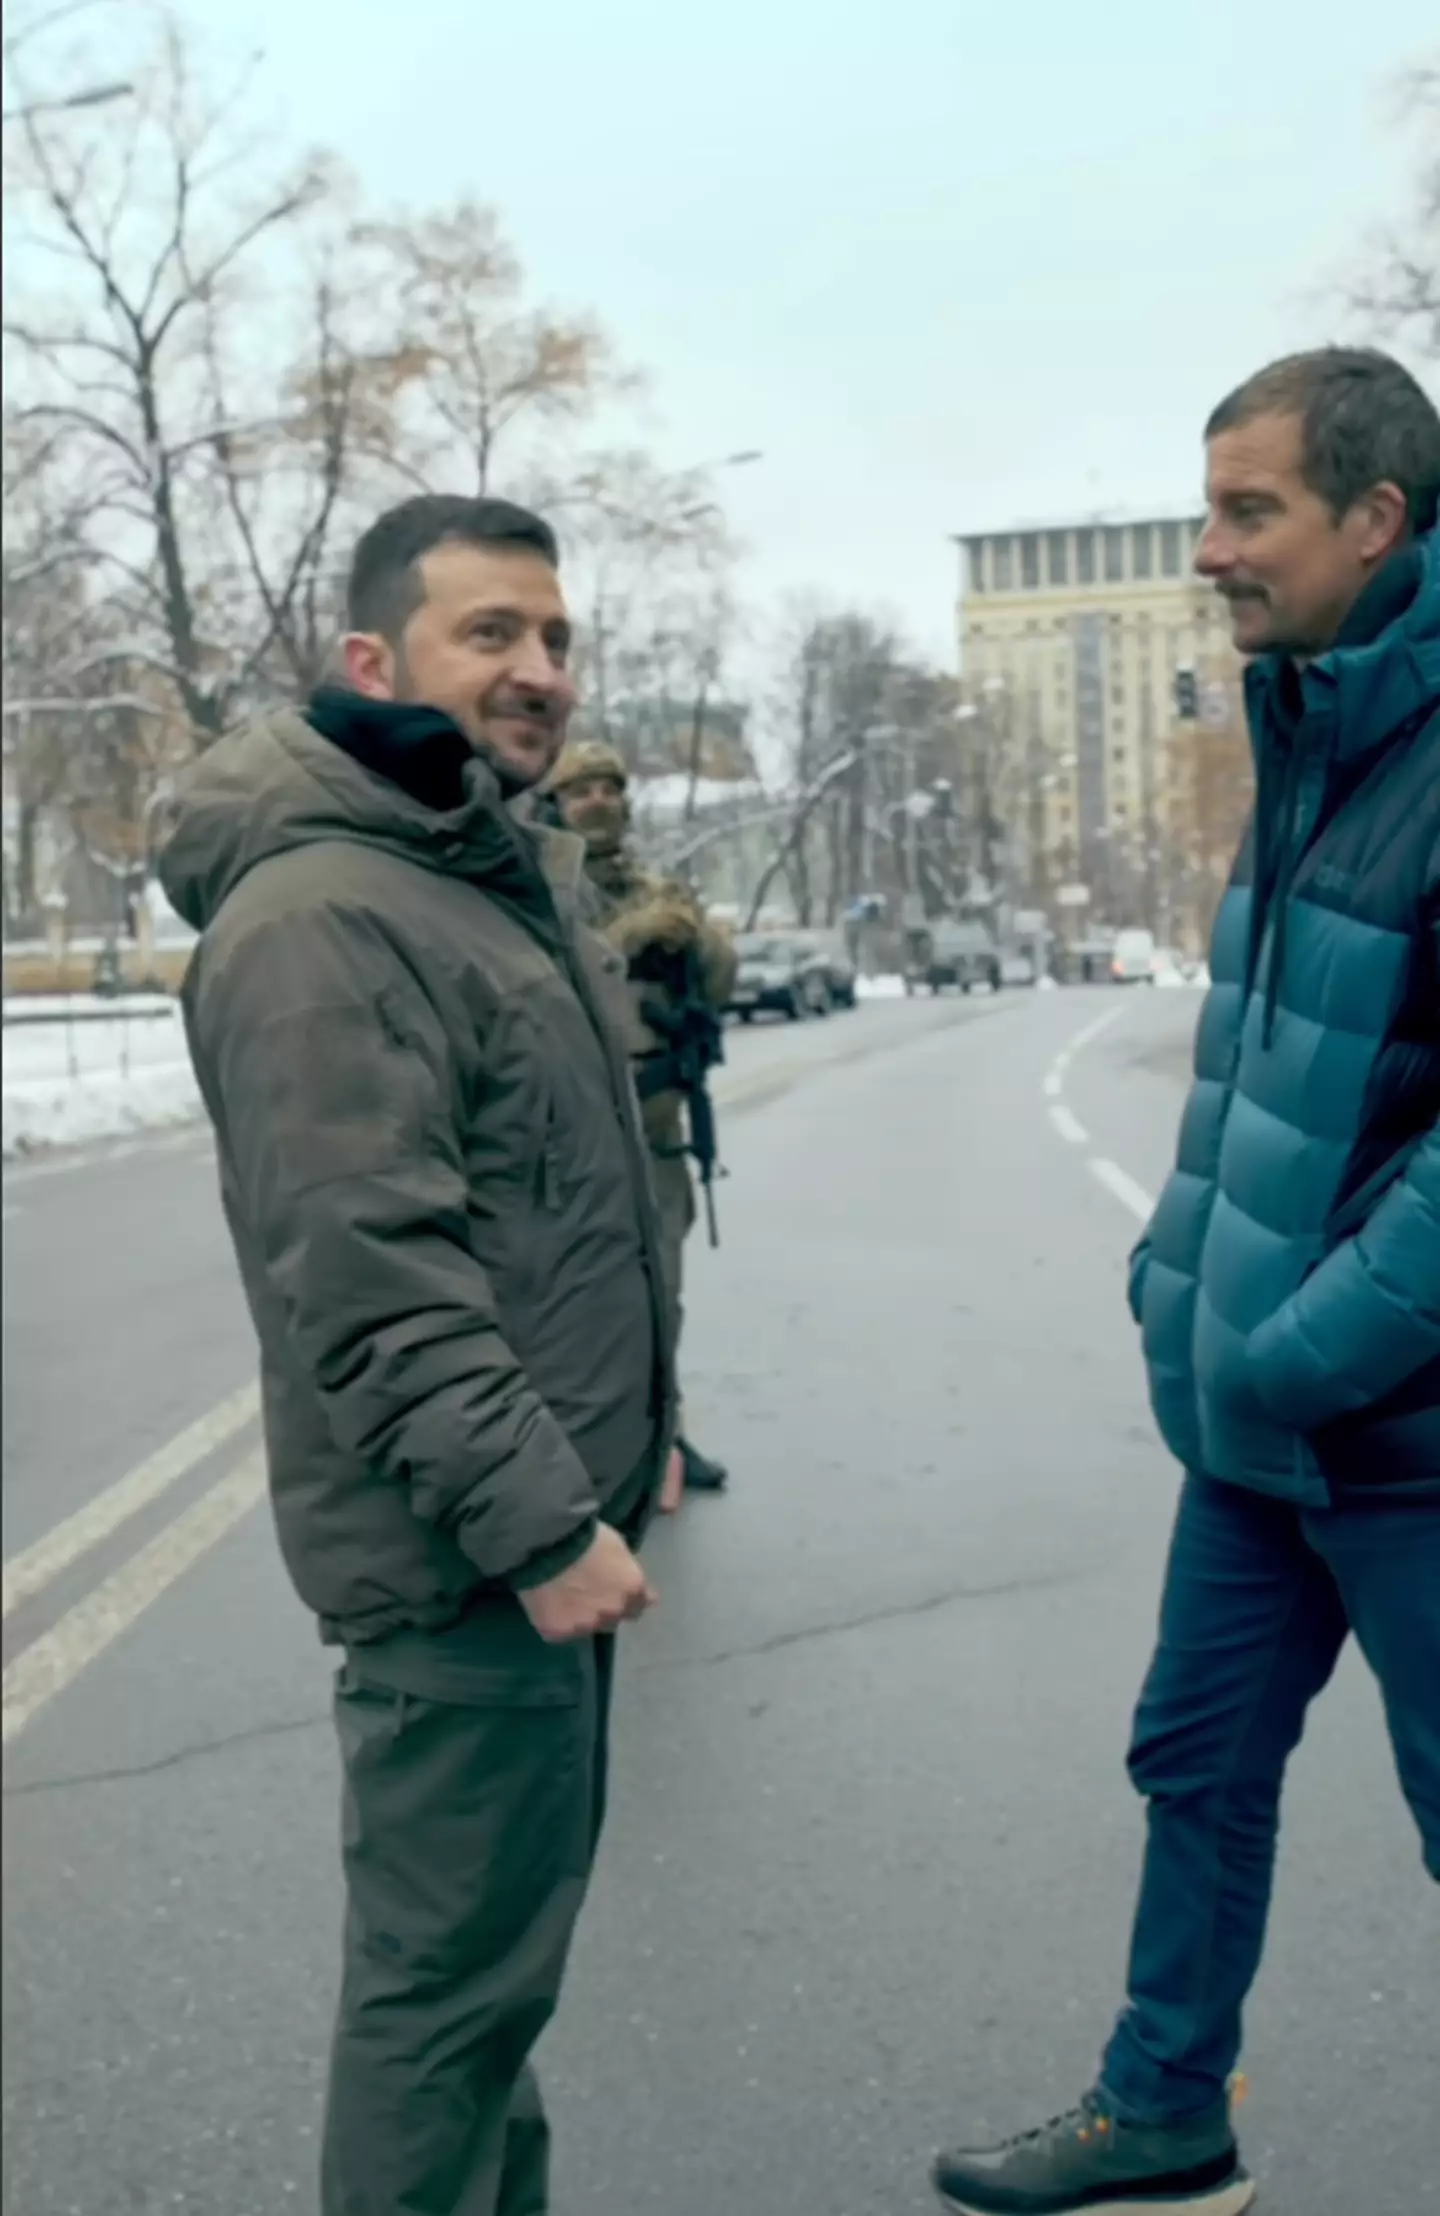 Grylls and Zelensky's chat will air on Tuesday at 8:00pm on Channel 4.